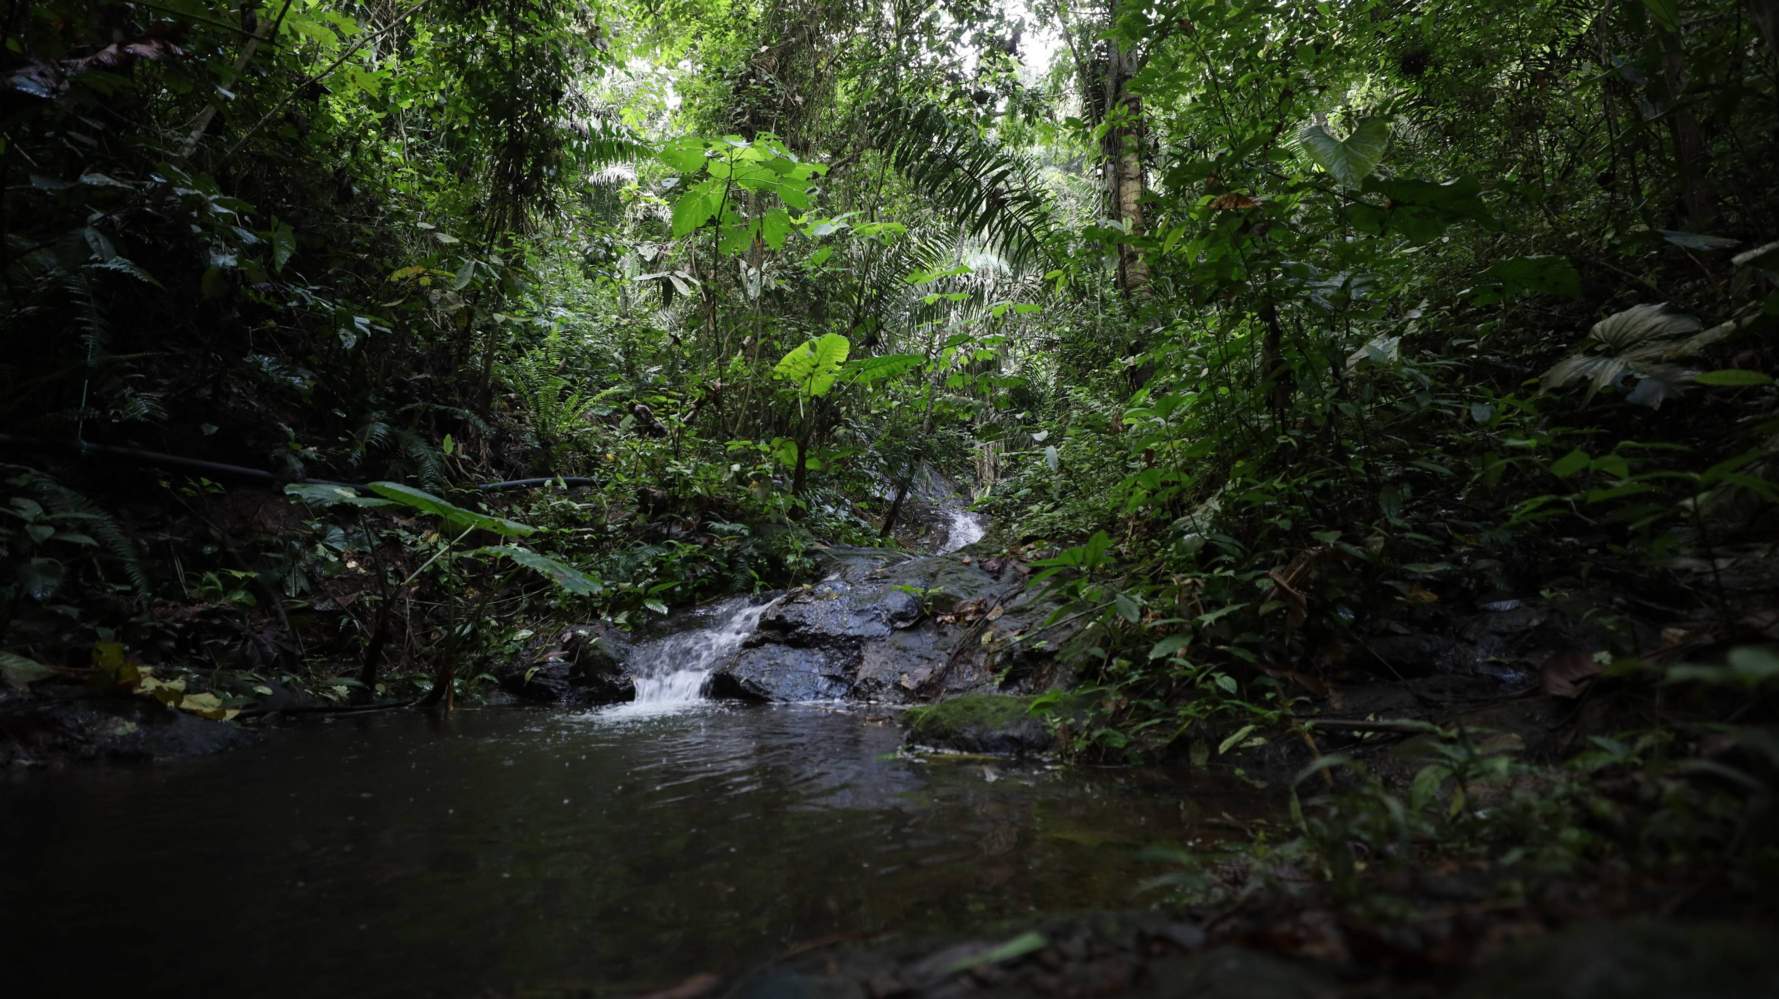 Newswise: The Genetics of Disease in the Forests of Ecuador